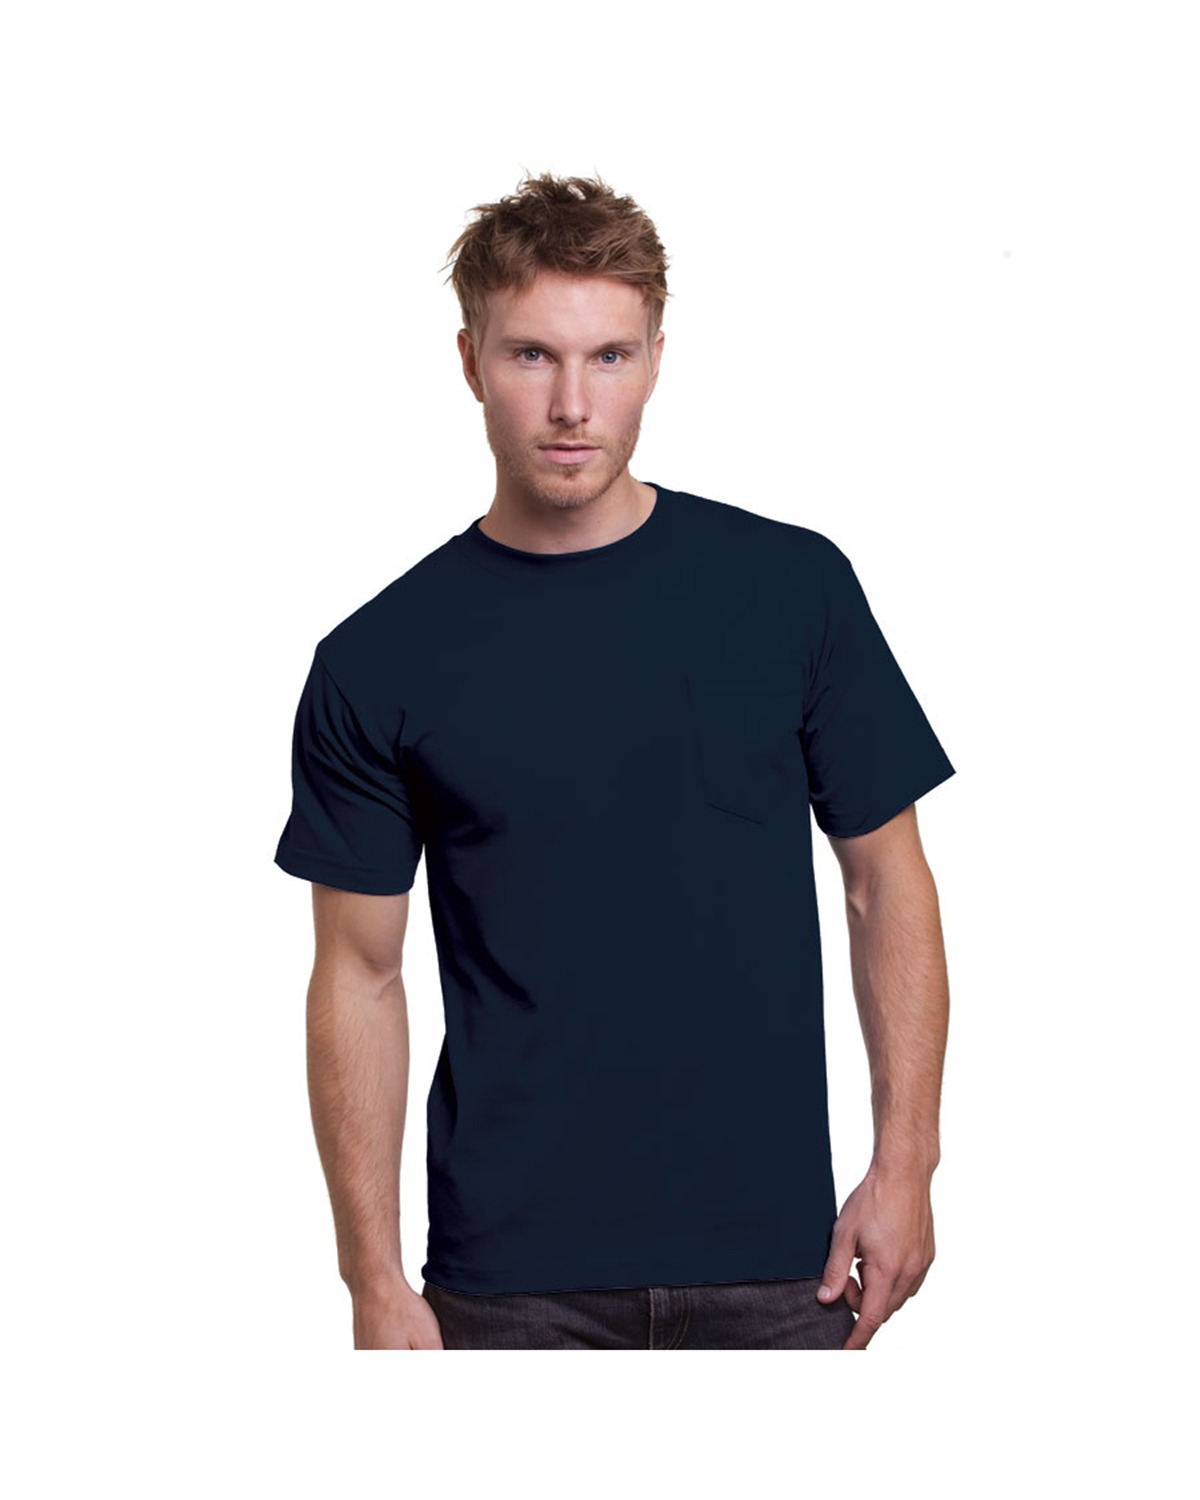 Bayside 3015 Union Made Short Sleeve T-Shirt with a Pocket